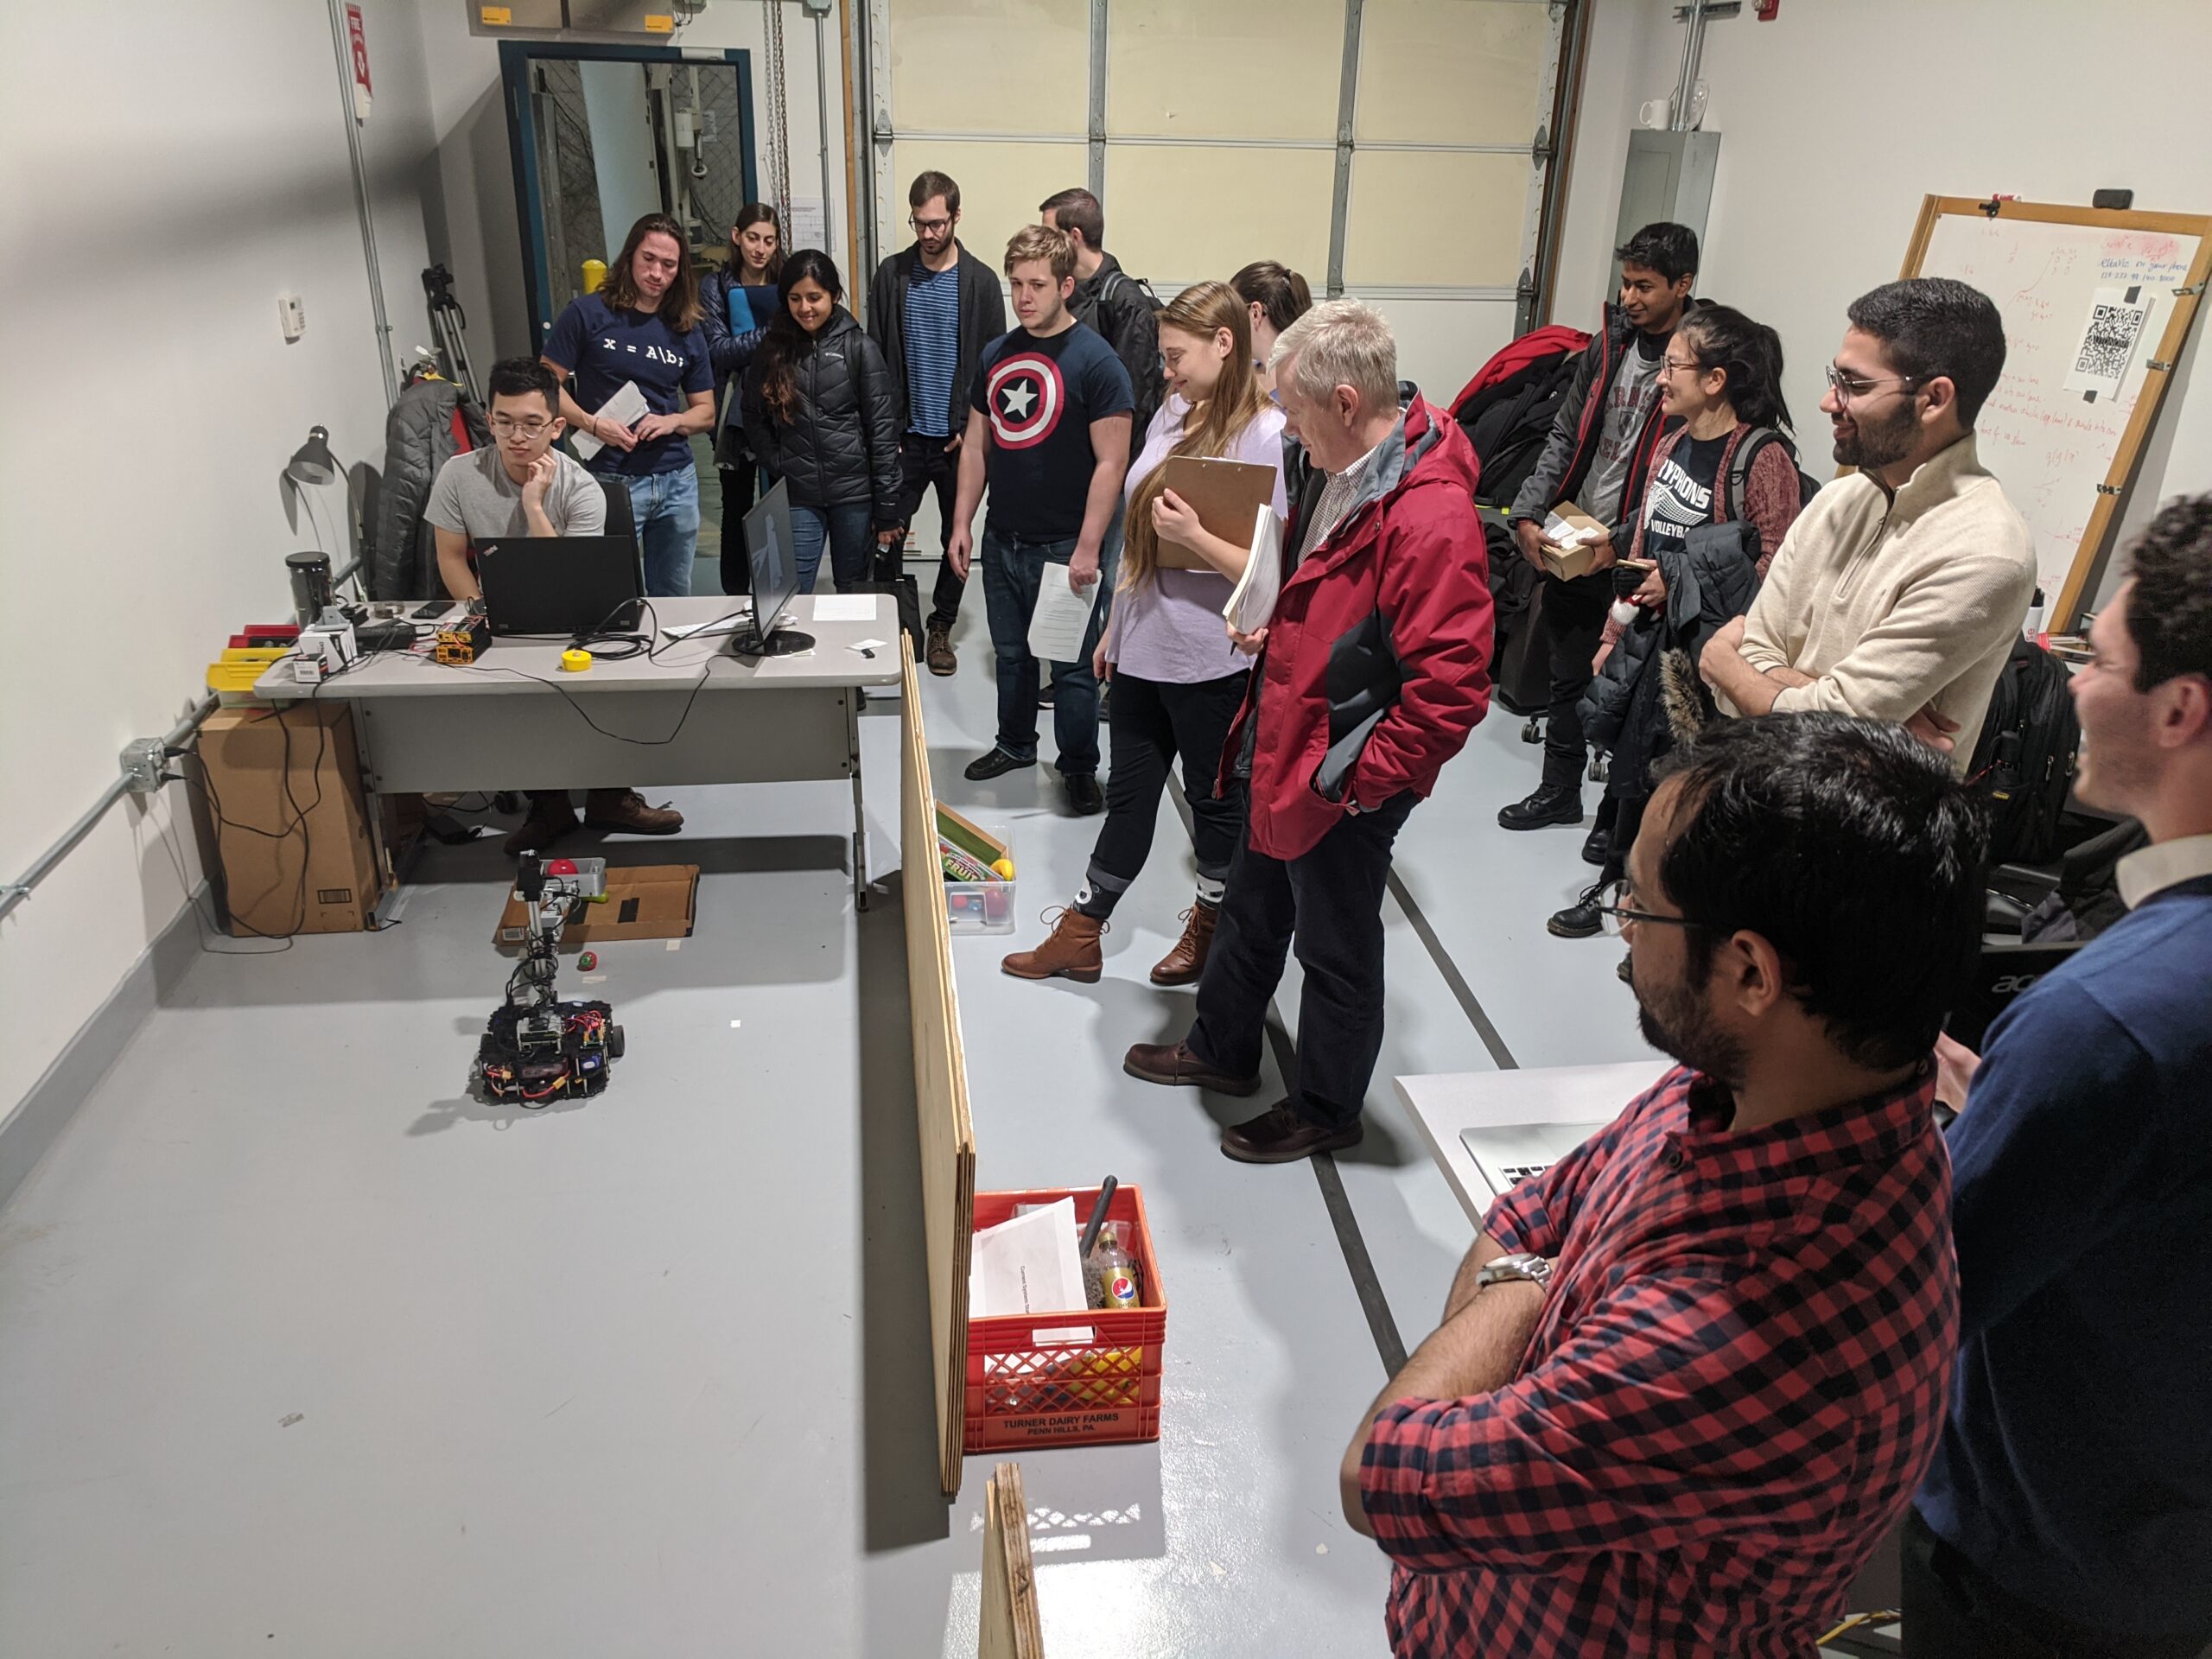 The instructors can place objects anywhere. CuBi runs autonomously, searching, finding, collecting obejcts and dumping them in the box until the whole area is clean.